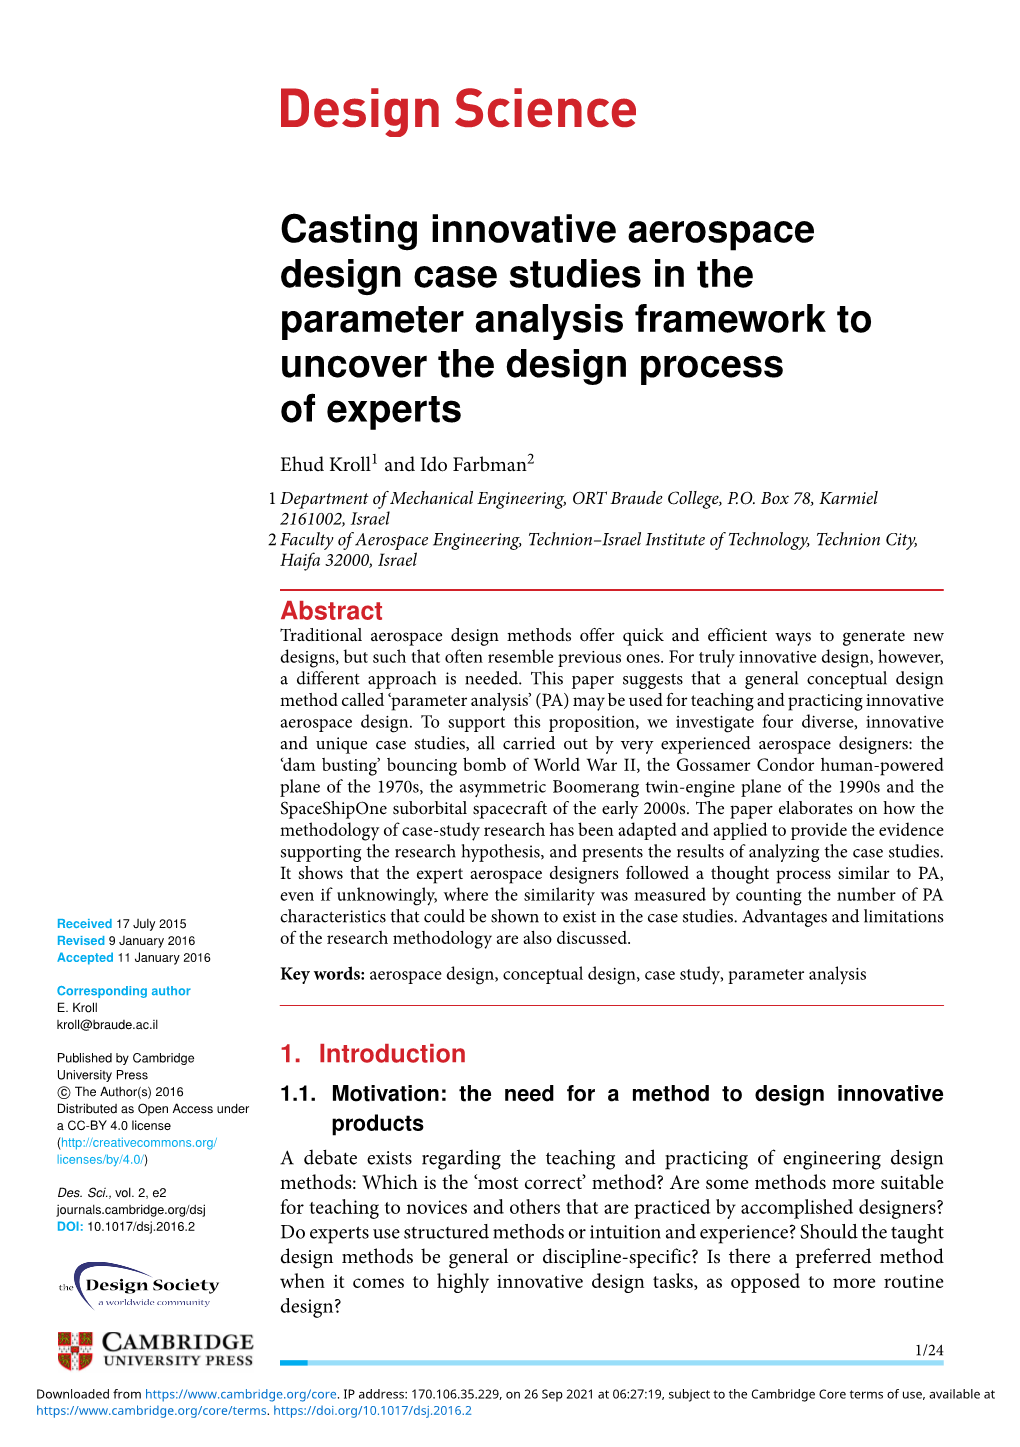 Casting Innovative Aerospace Design Case Studies in the Parameter Analysis Framework to Uncover the Design Process of Experts